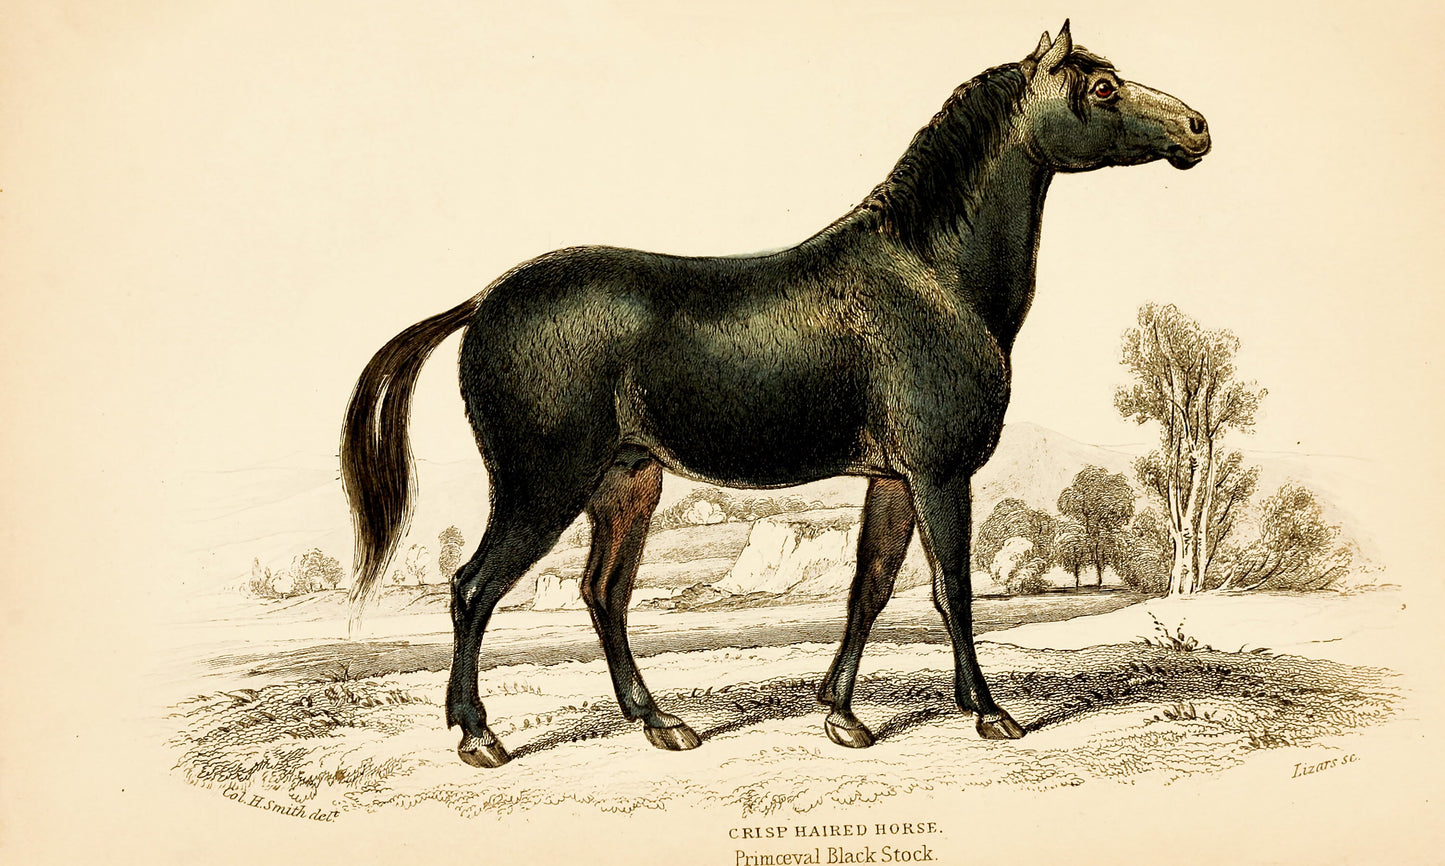 The Natural History of Horses [30 Images]